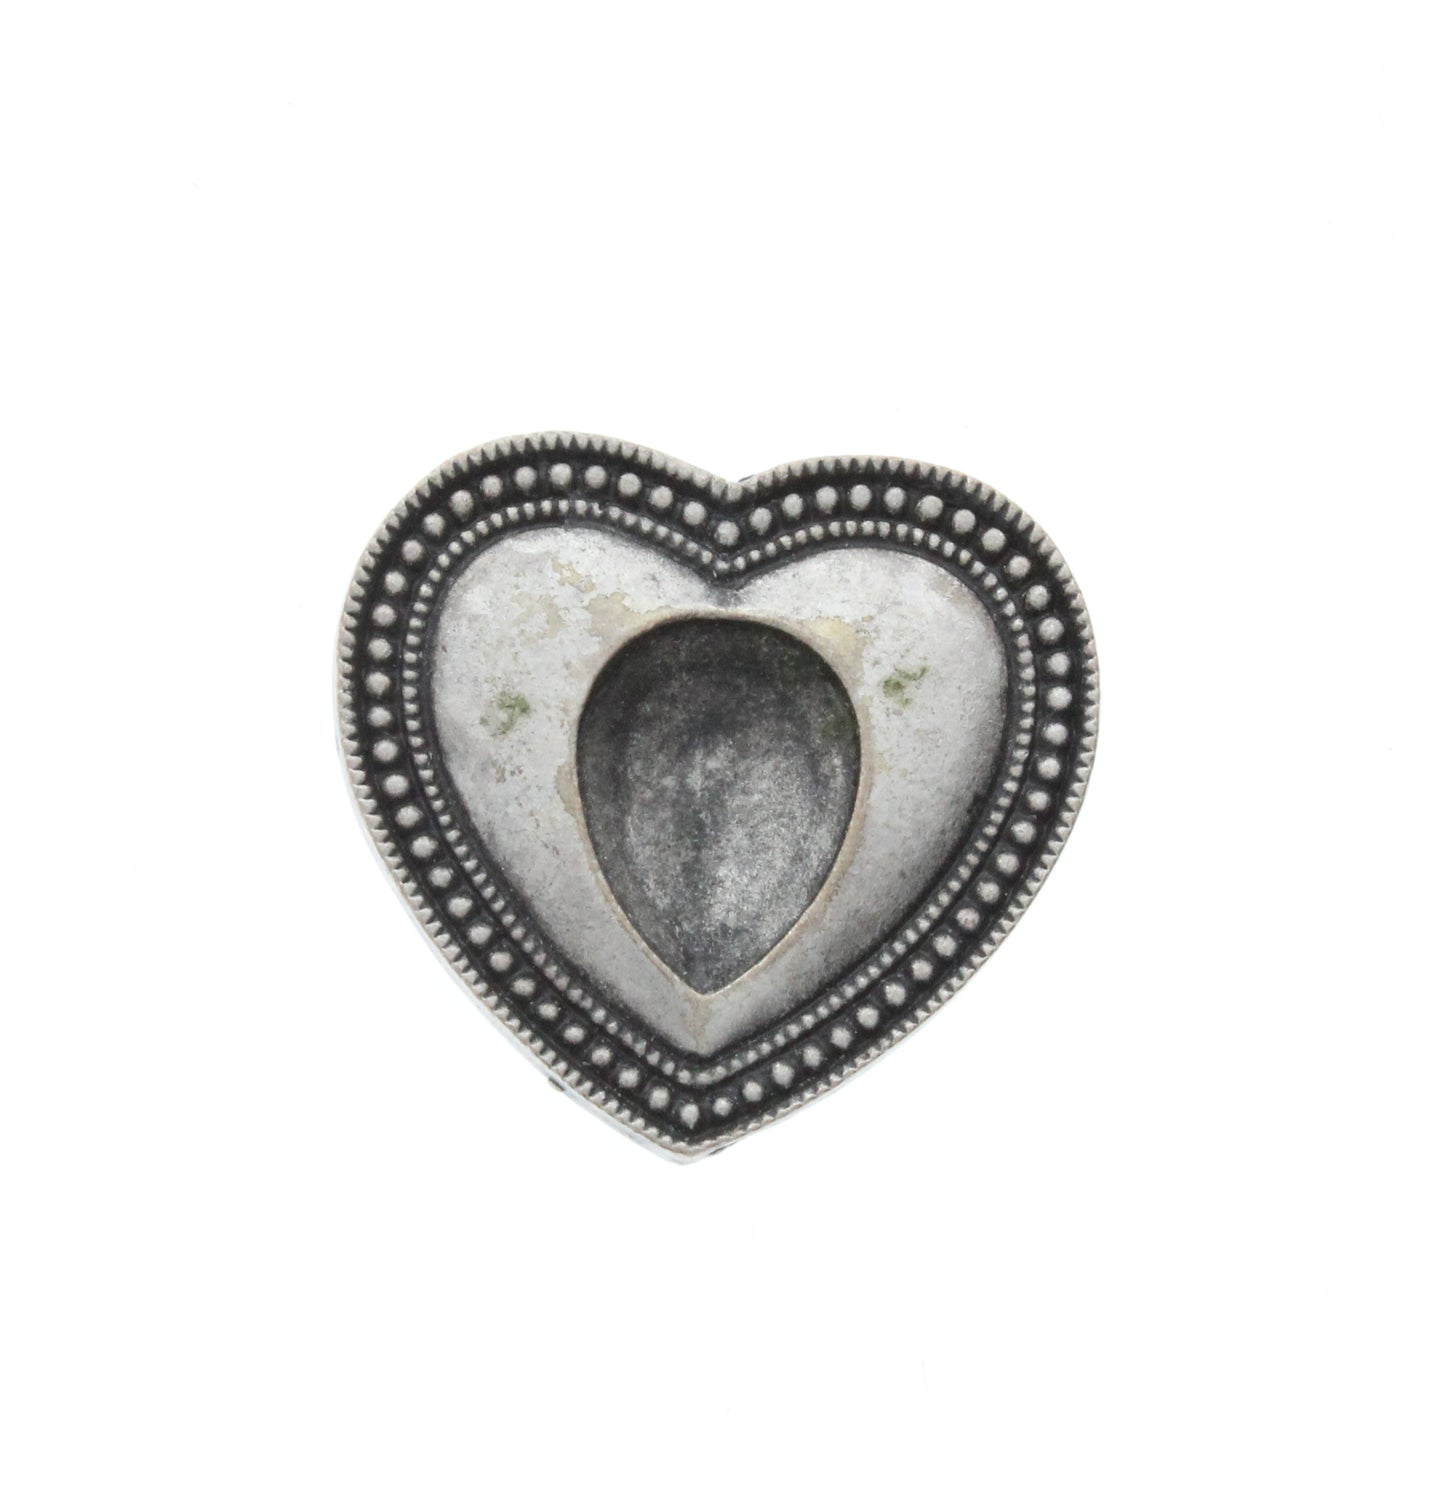 Antique Silver Heart with Setting for Pear Shaped Stone, PKG/6